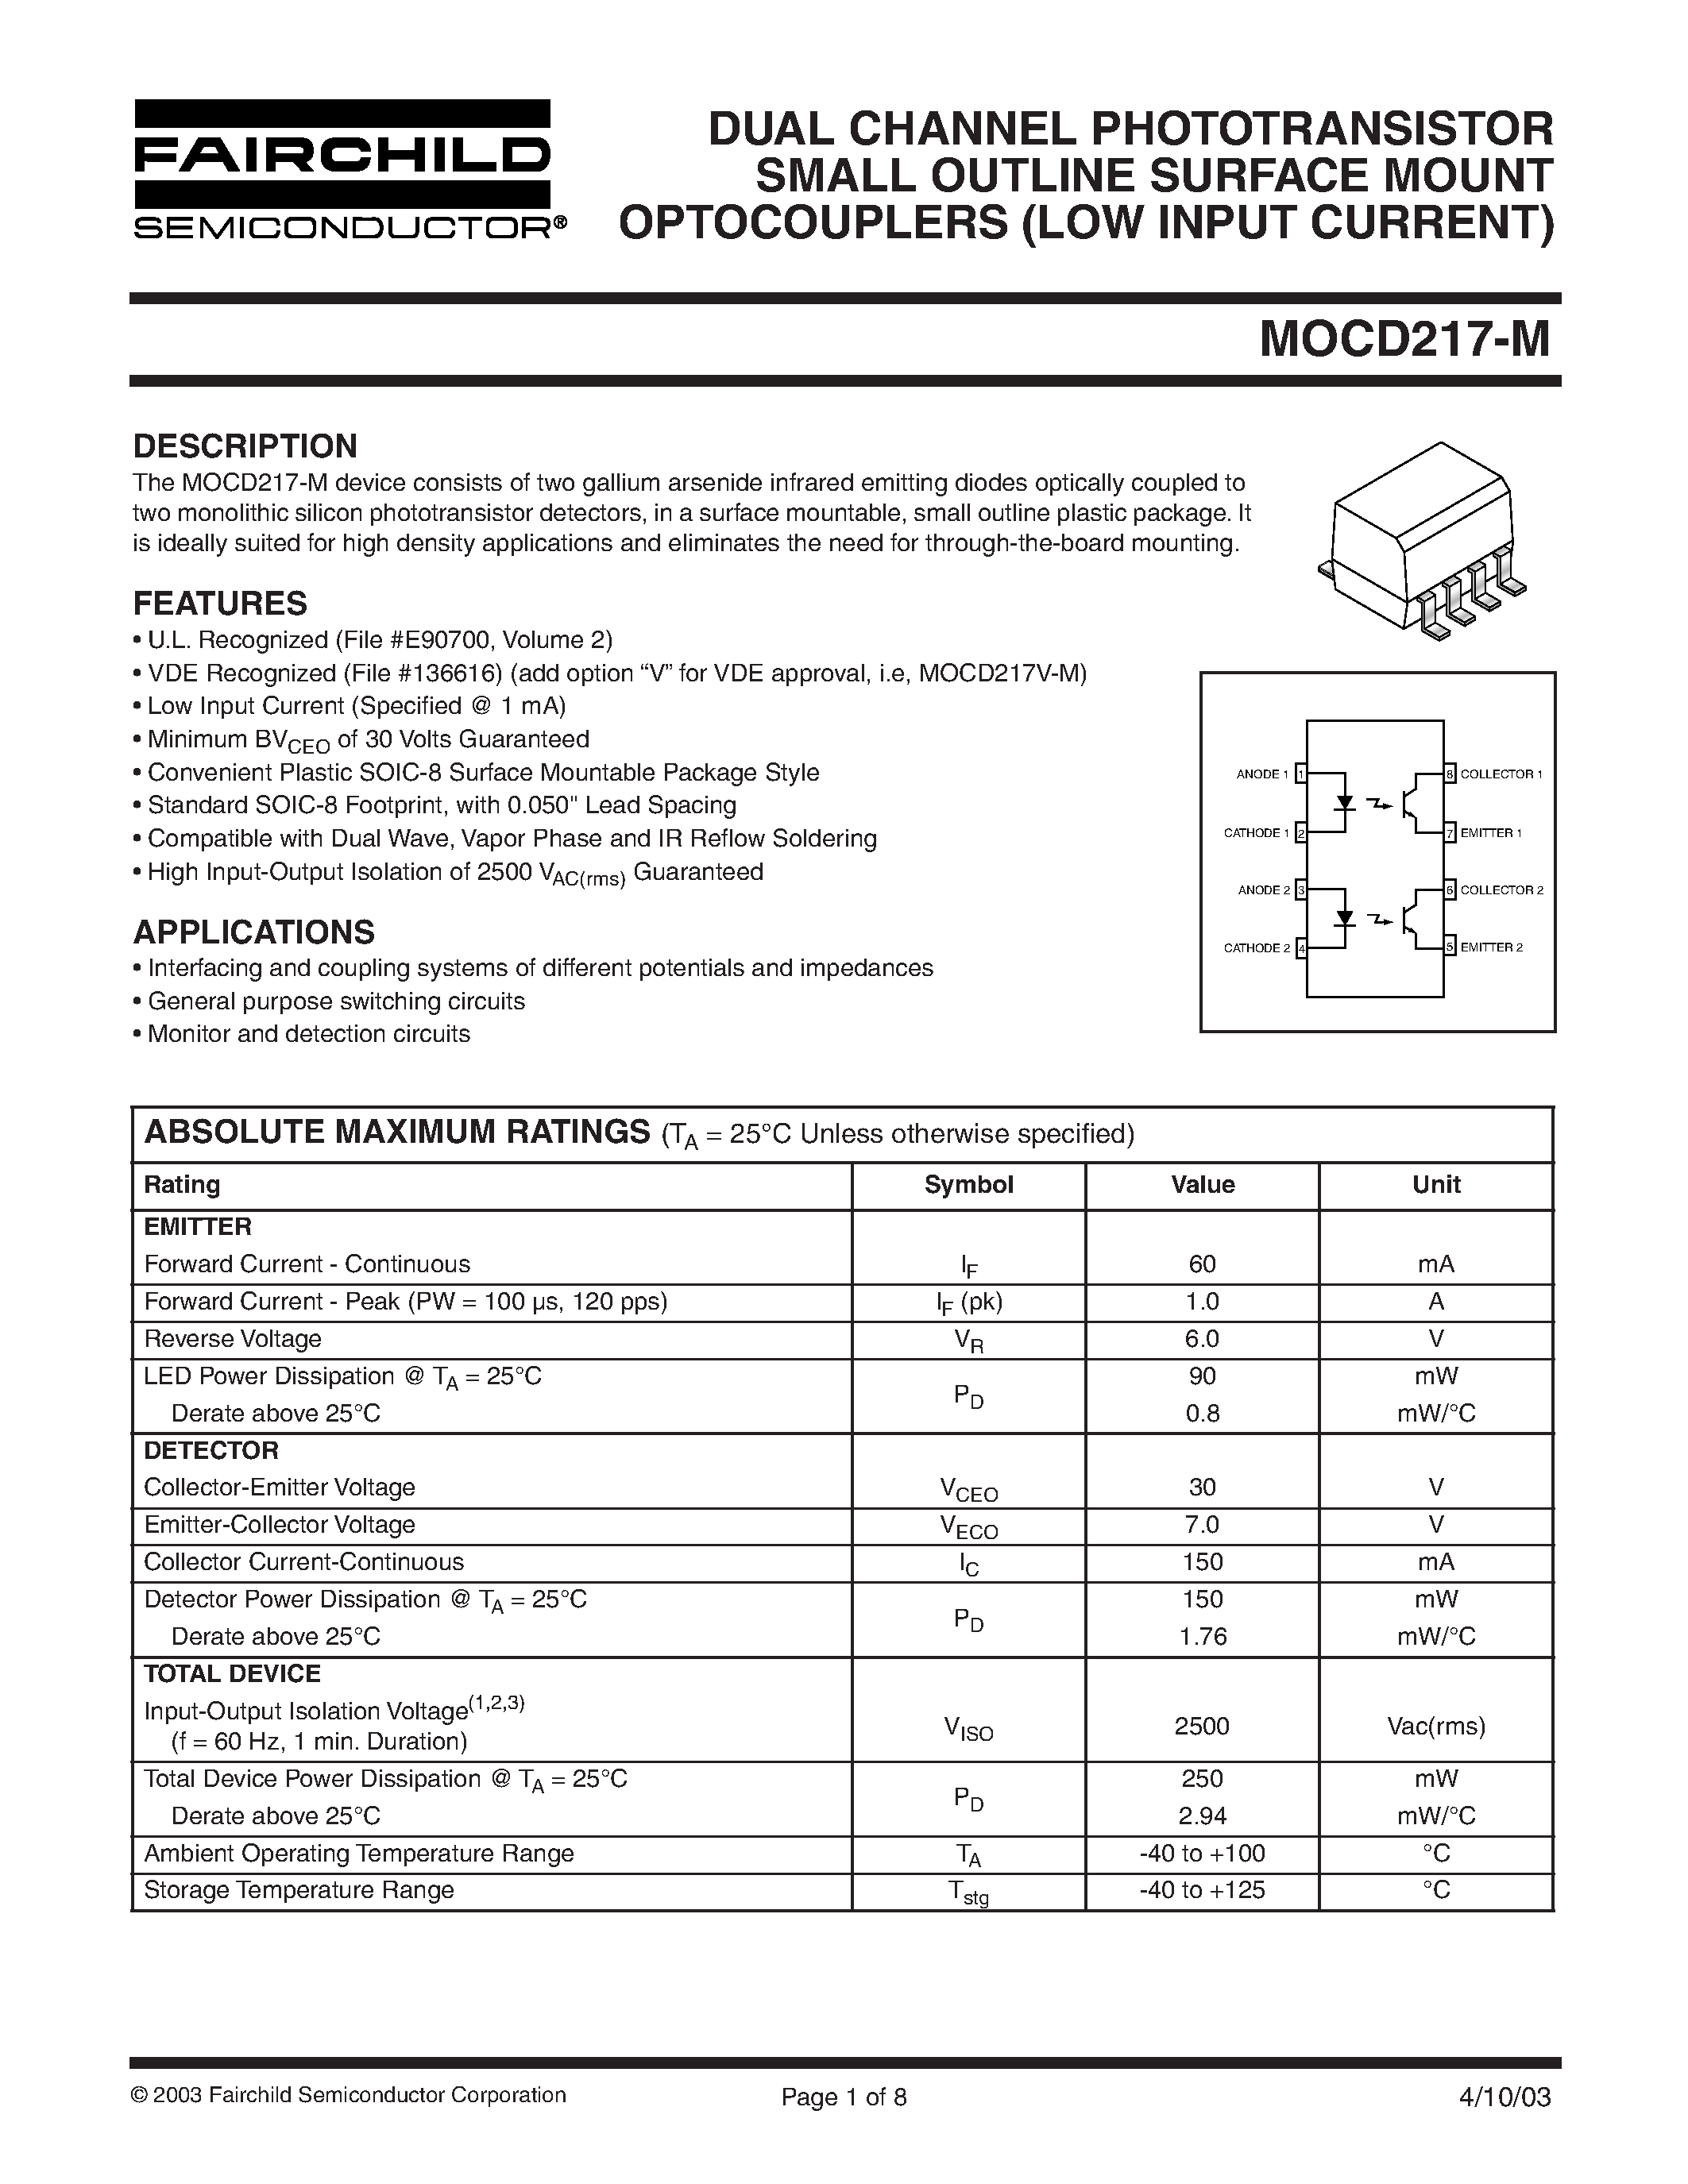 Даташит MOCD217-M - DUAL CHANNEL PHOTOTRANSISTOR SMALL OUTLINE SURFACE MOUNT OPTOCOUPLERS страница 1